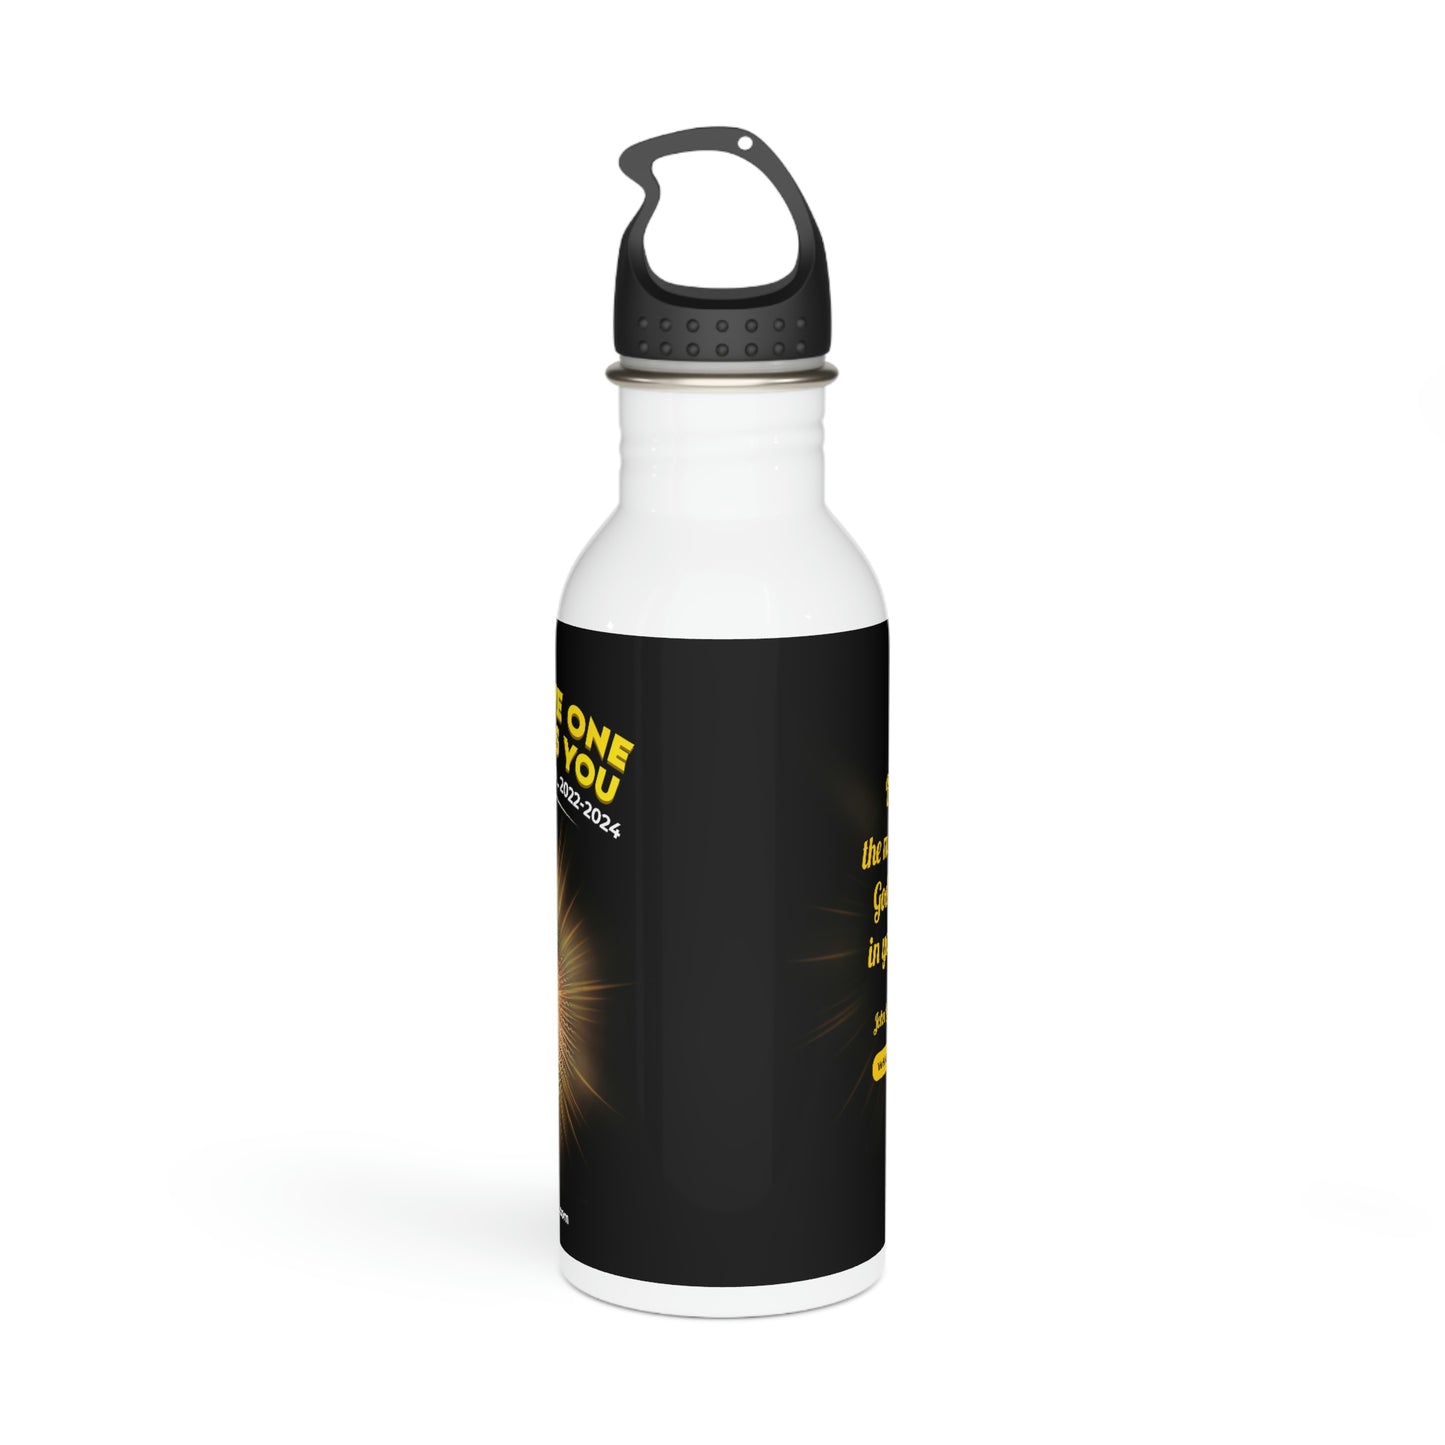 Be with the one who loves you Stainless Steel Water Bottle